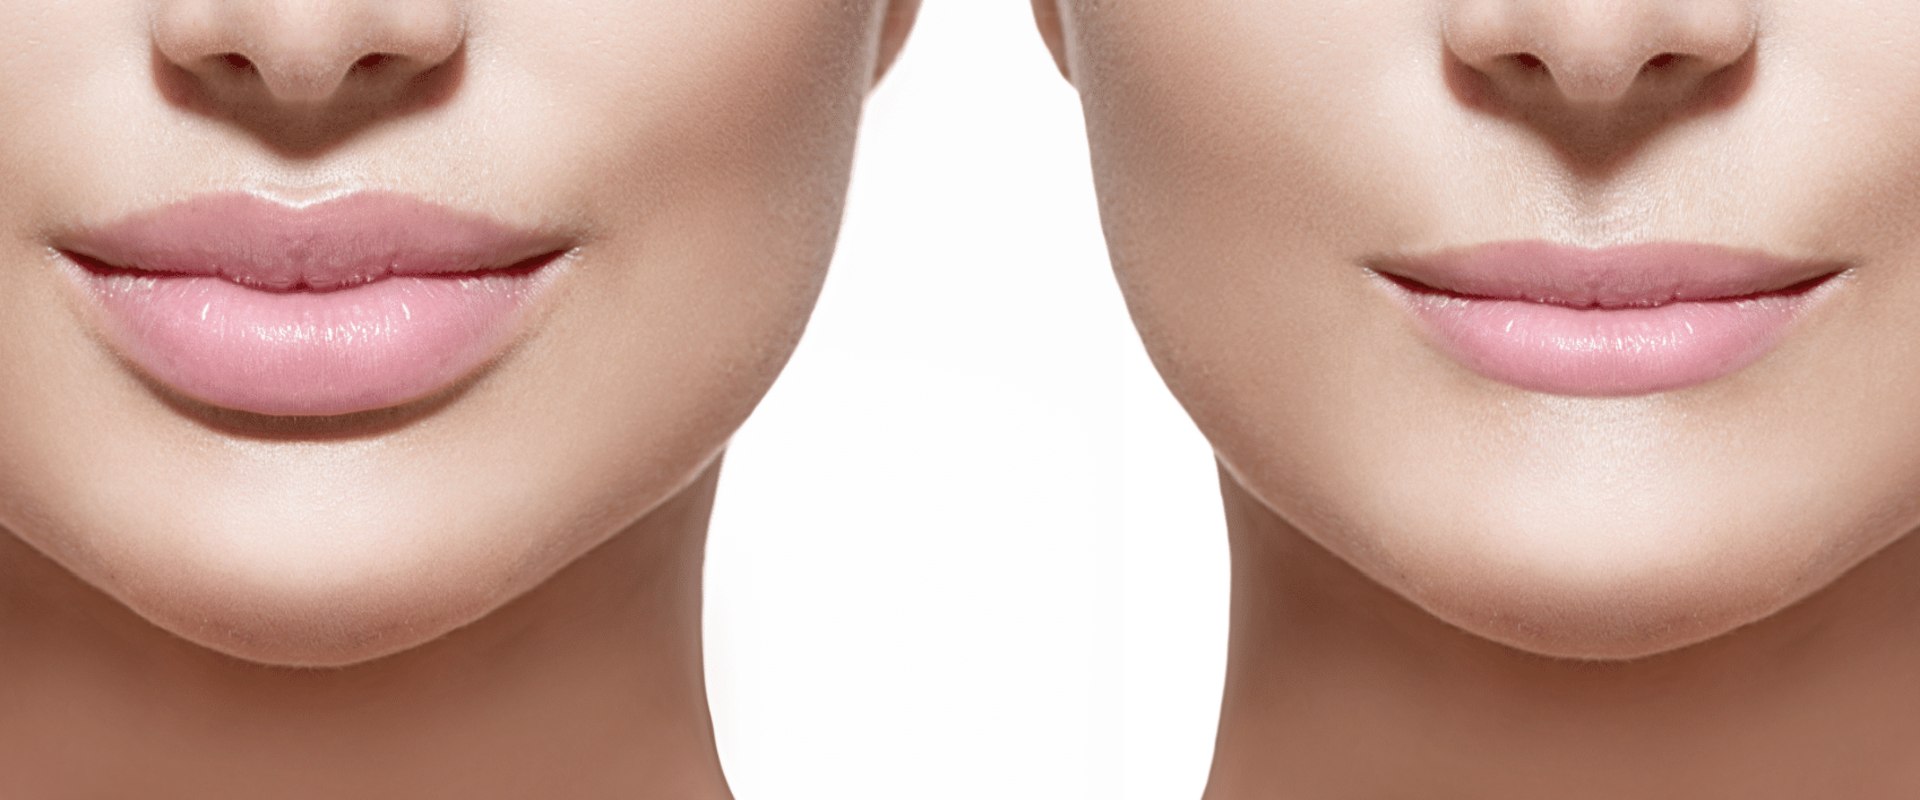 Why Juvederm is the Best Choice for Dermal Fillers